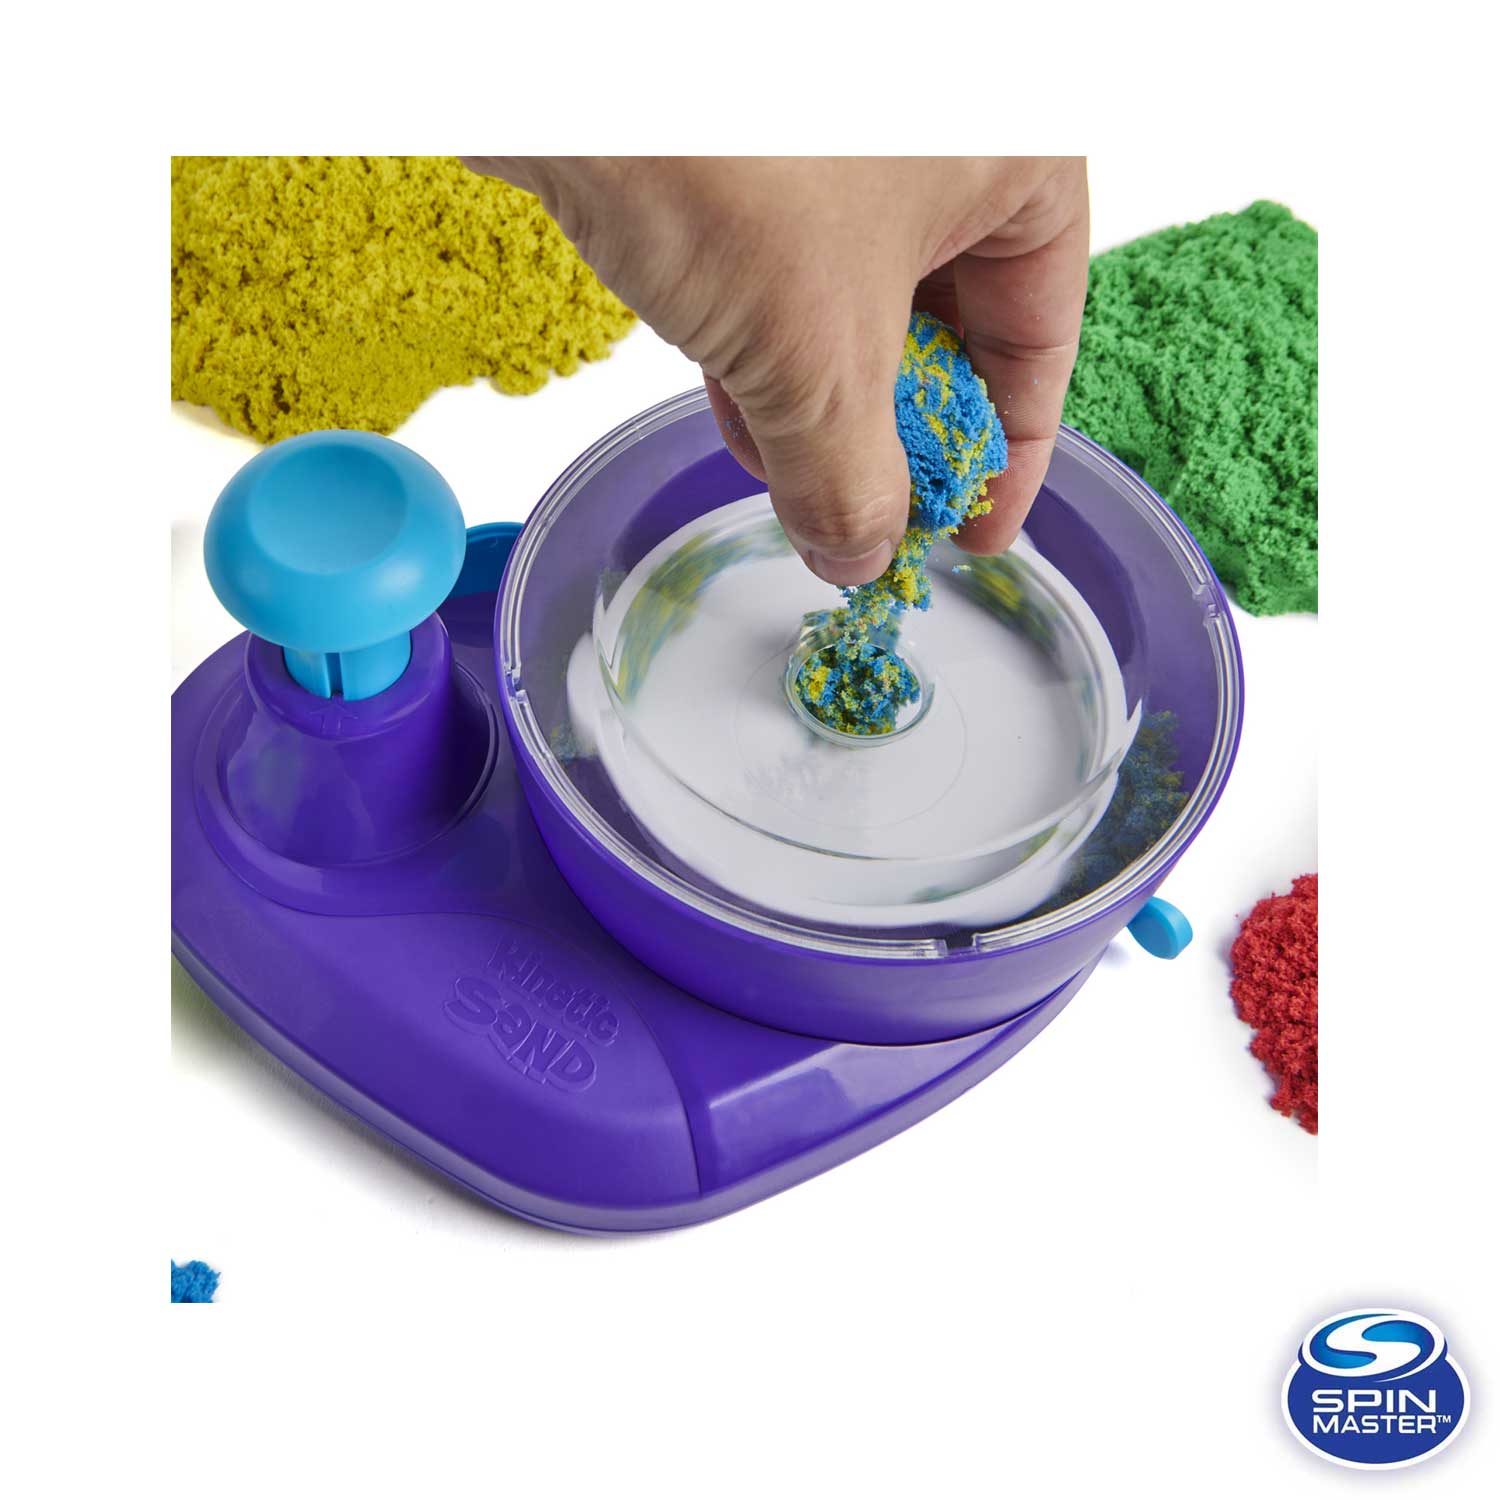 Kinetic Sand Swirl 'N' Surprise, Ages 3+